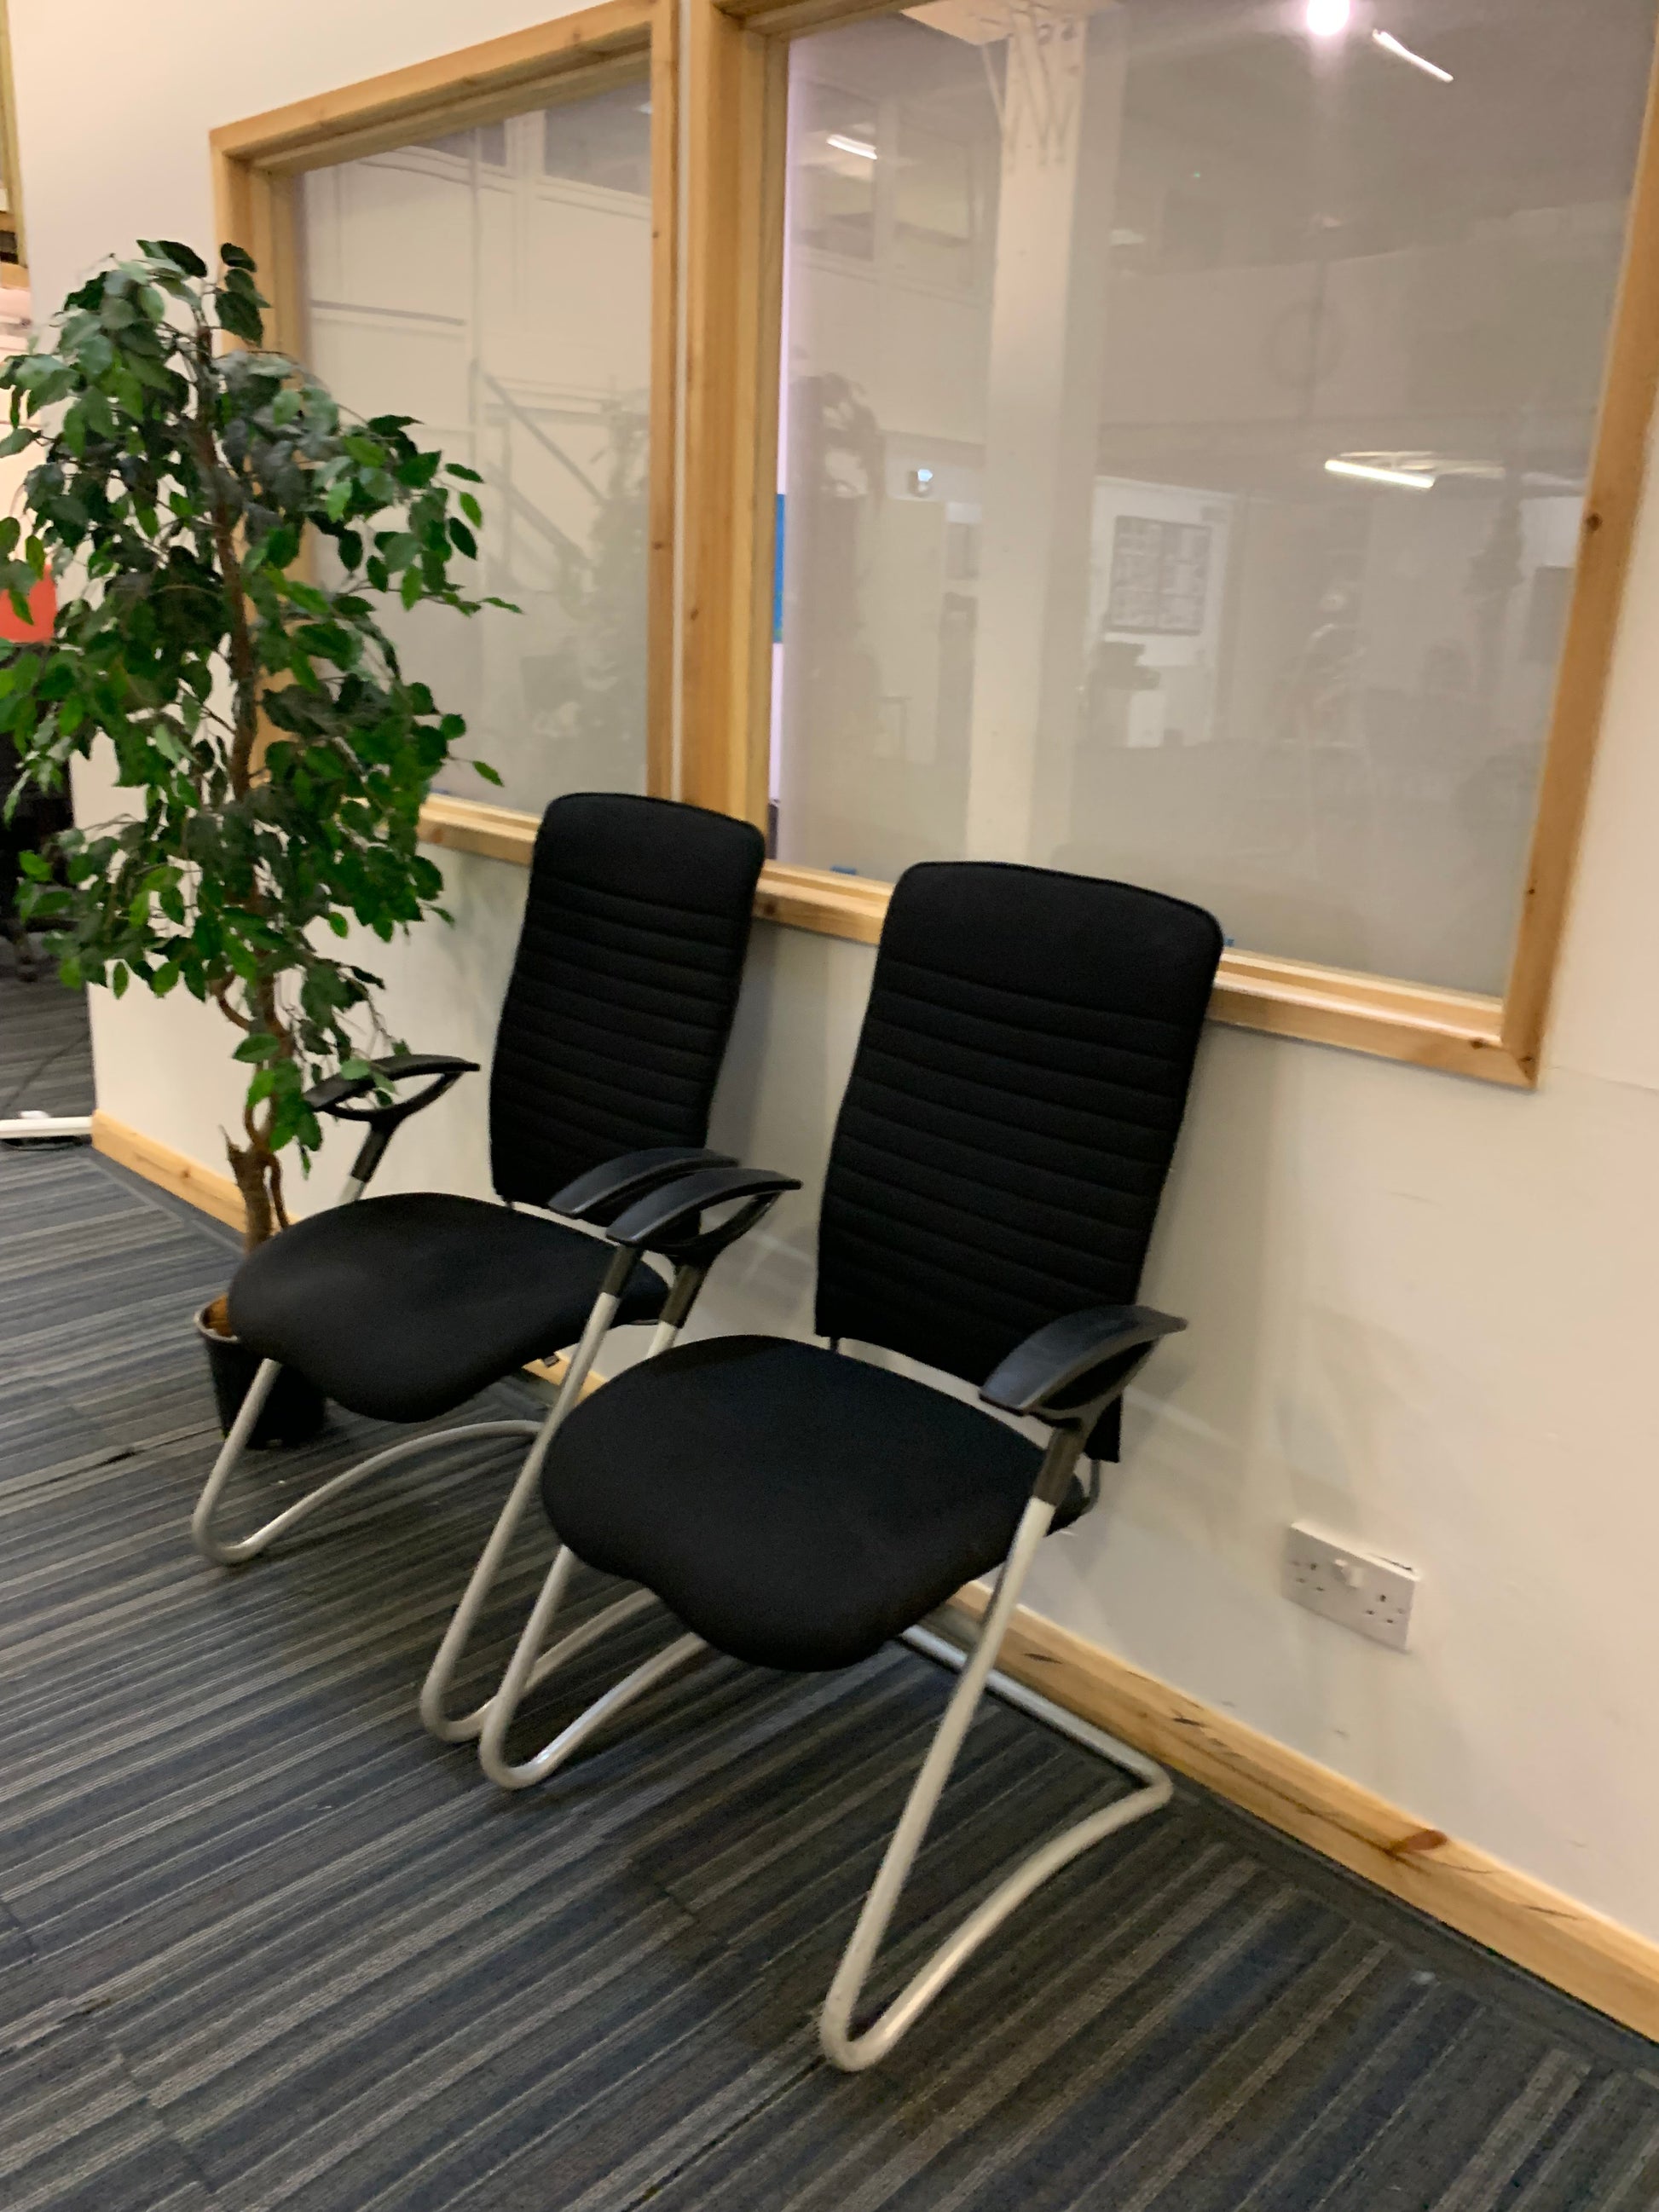 centre, two black office executive sitland chairs in front of window, left, green plant